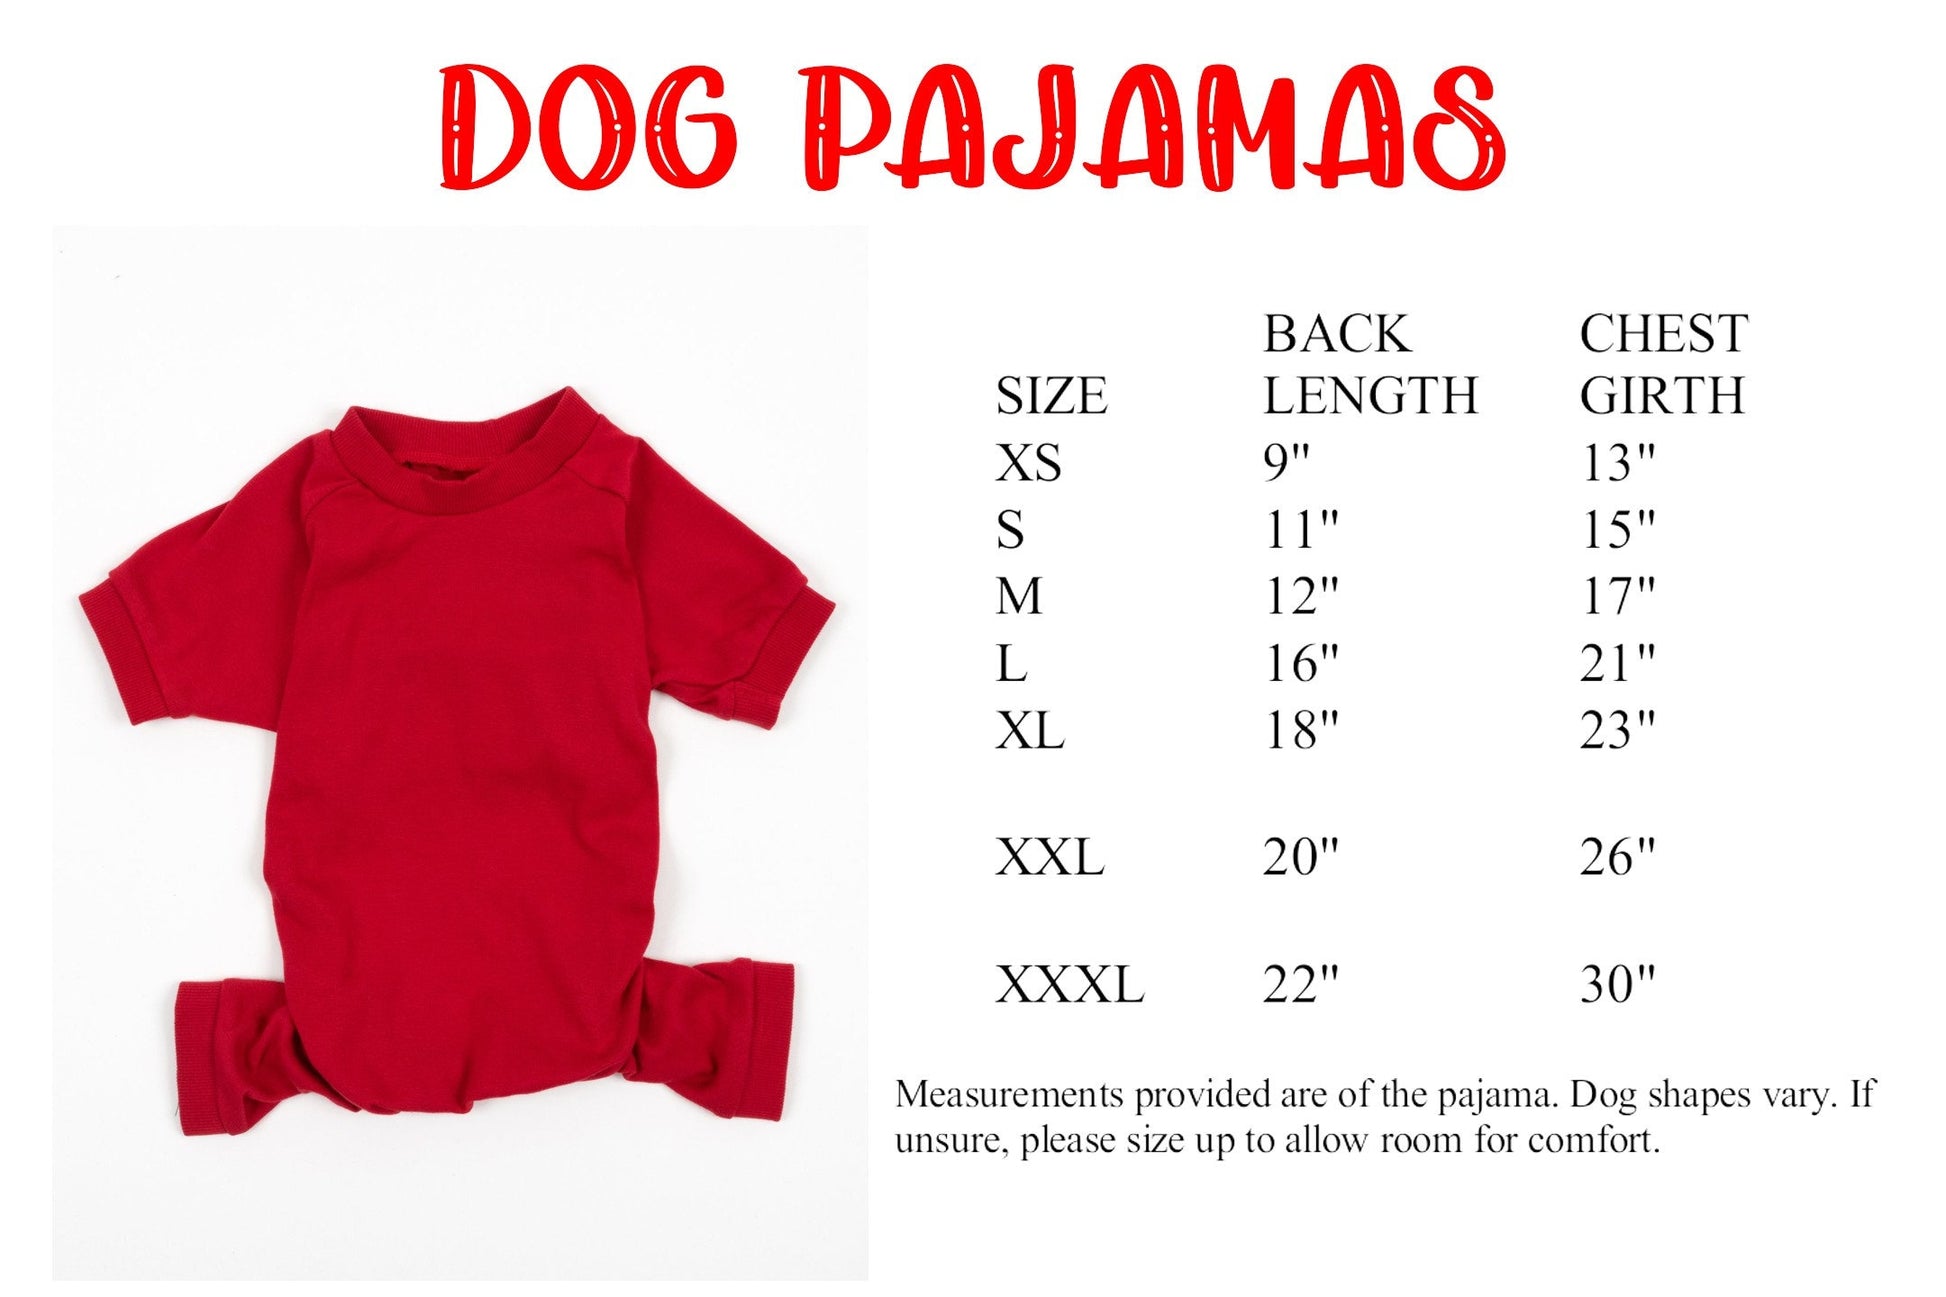 I Love You More than Words Can Say Pajamas Red Striped Pajamas, mommy and me pjs, valentines pajamas for the family, valentines day